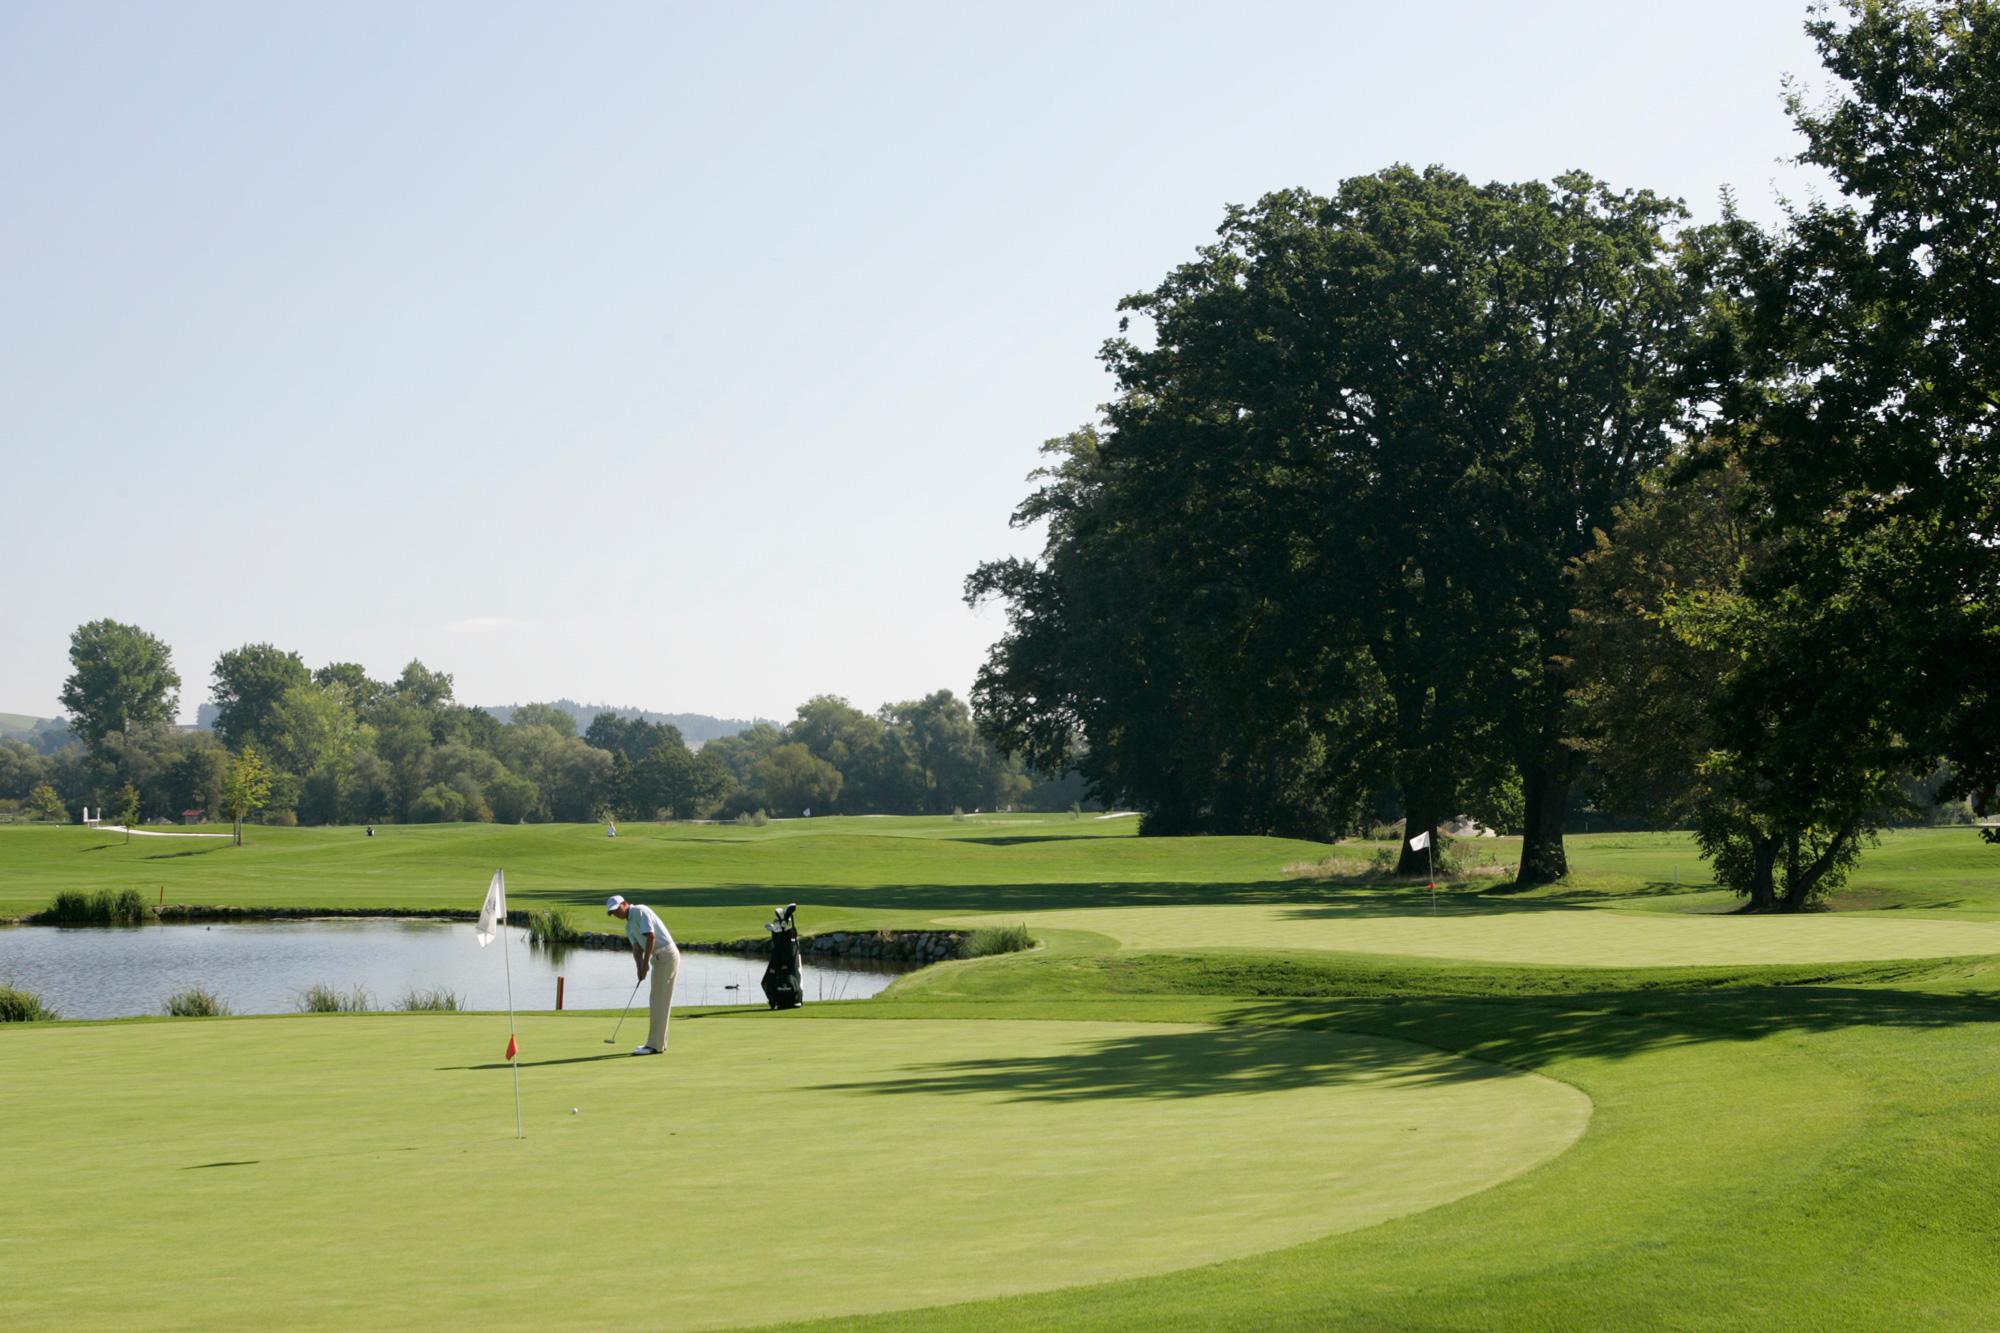 The Beckenbauer Golf Course's scenic golf course in vibrant Germany.